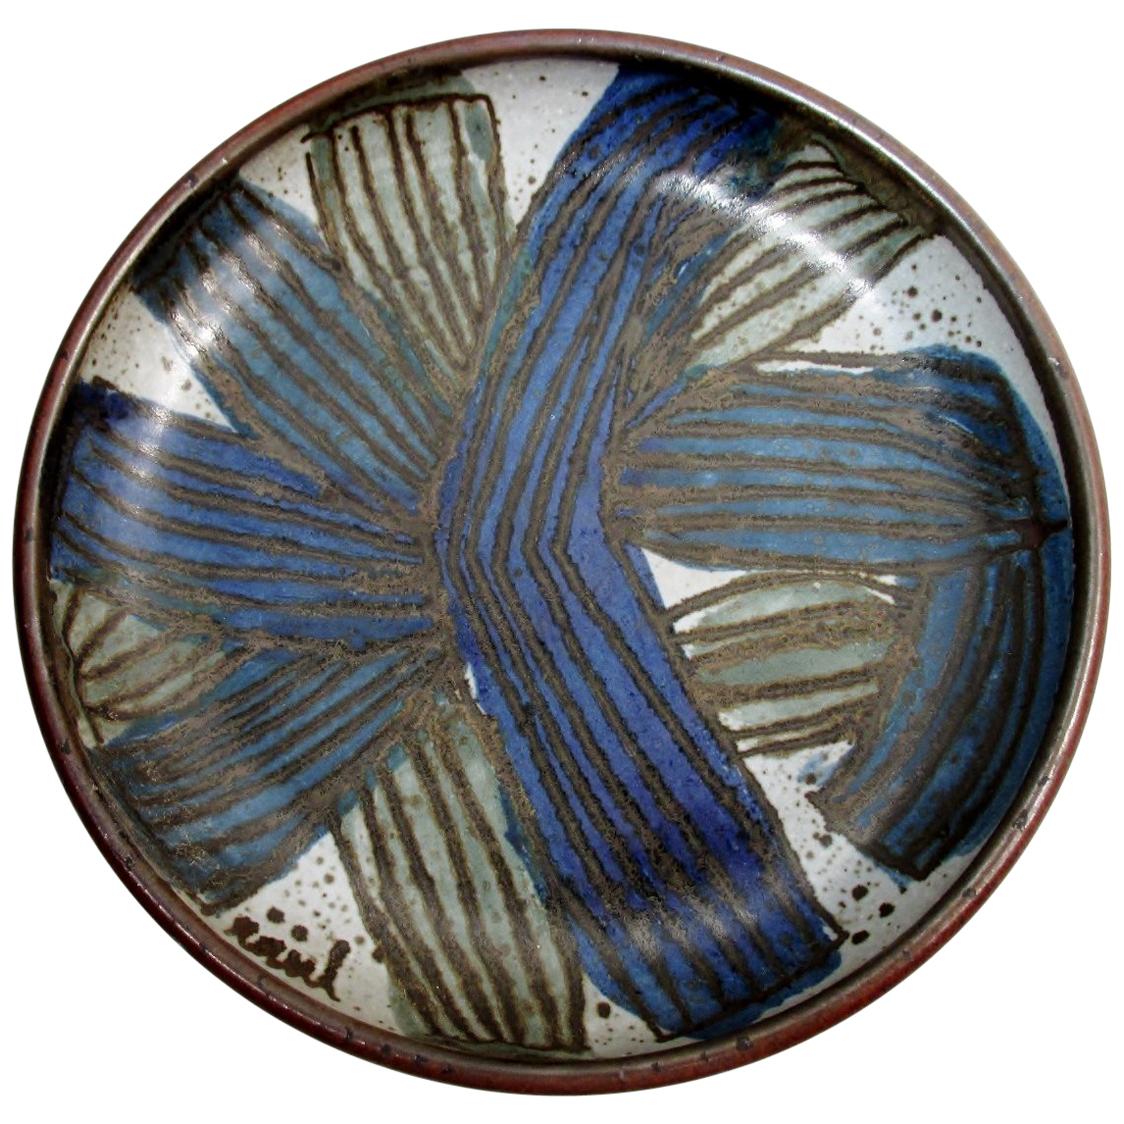 1965 Raul Coronel California Studio Pottery Abstract Charger